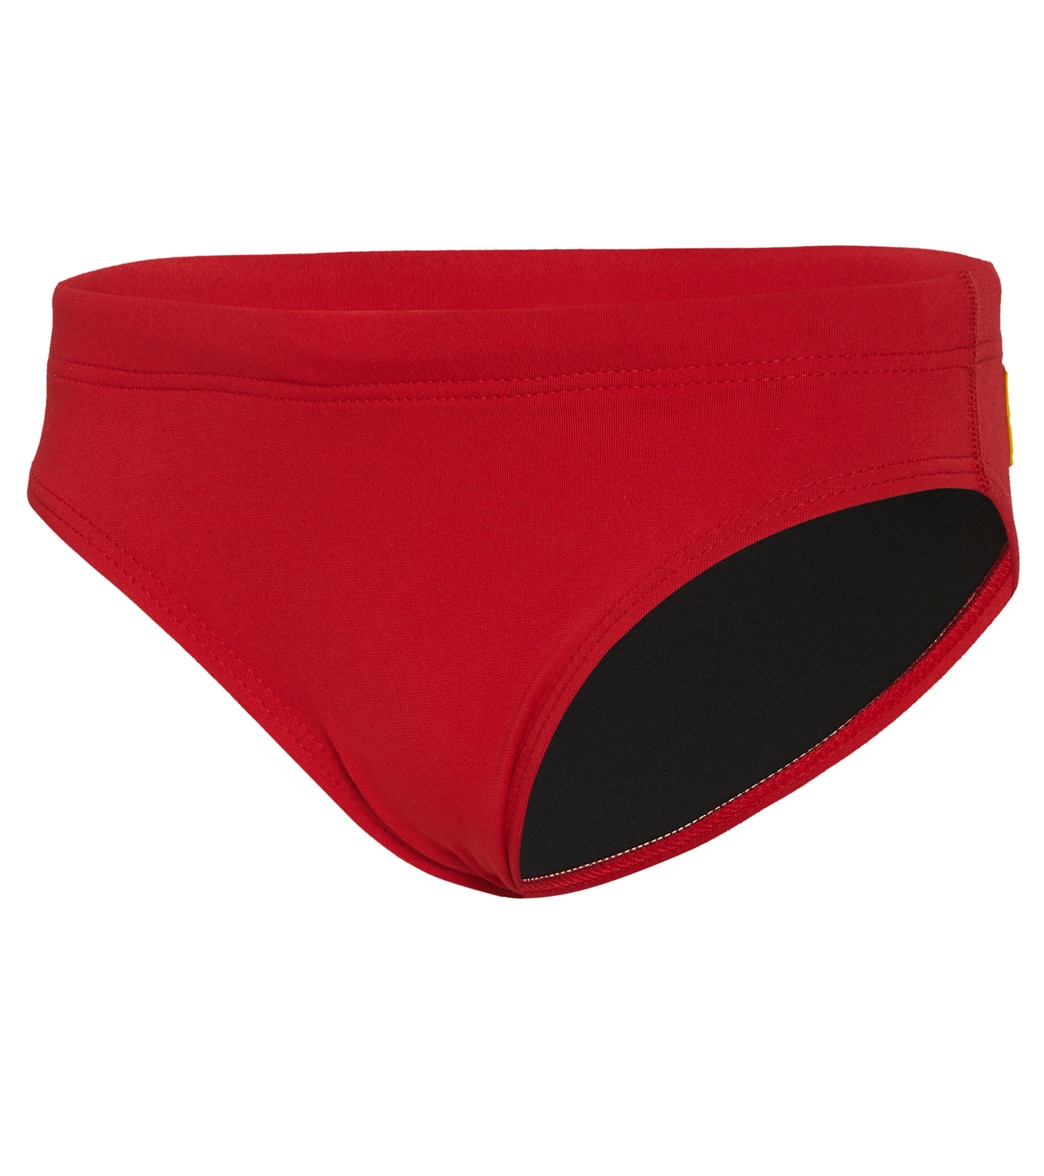 Finis Boys' Solid Brief Swimsuit - Red 18 - Swimoutlet.com